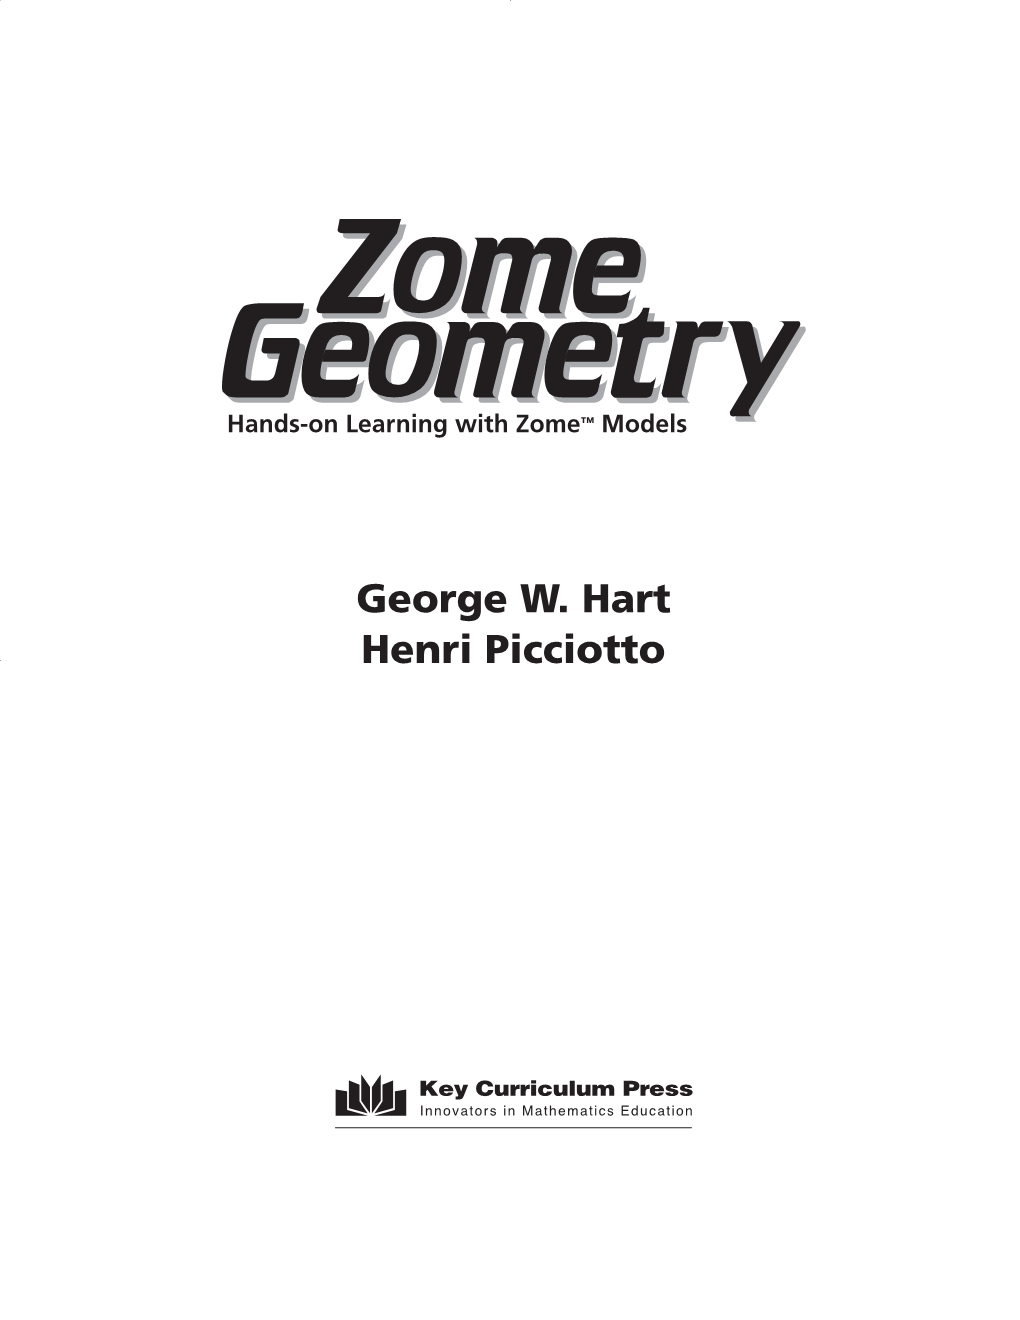 Table of Contents for the Zome Geometry Book